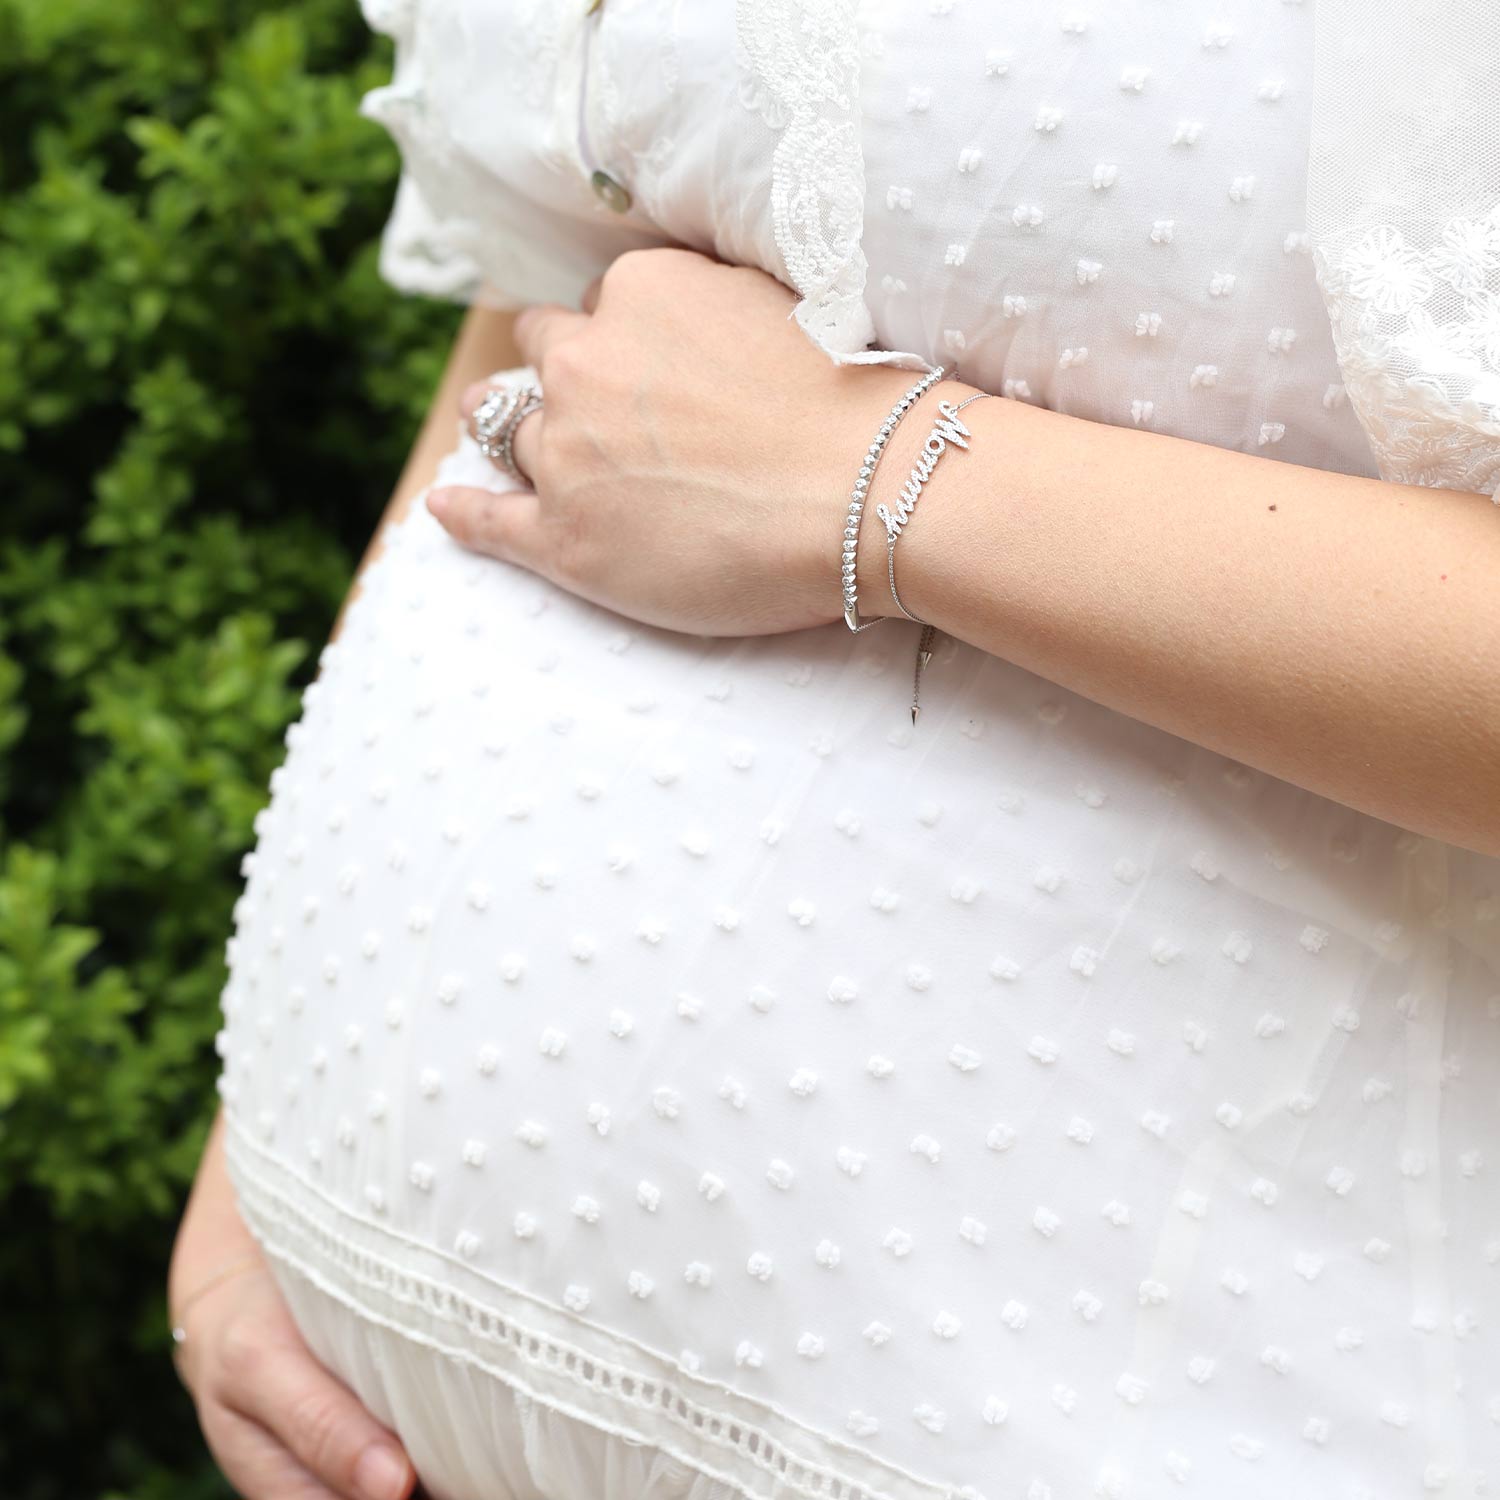 Pregnant woman with push present diamond jewelry featuring a Mommy bracelet